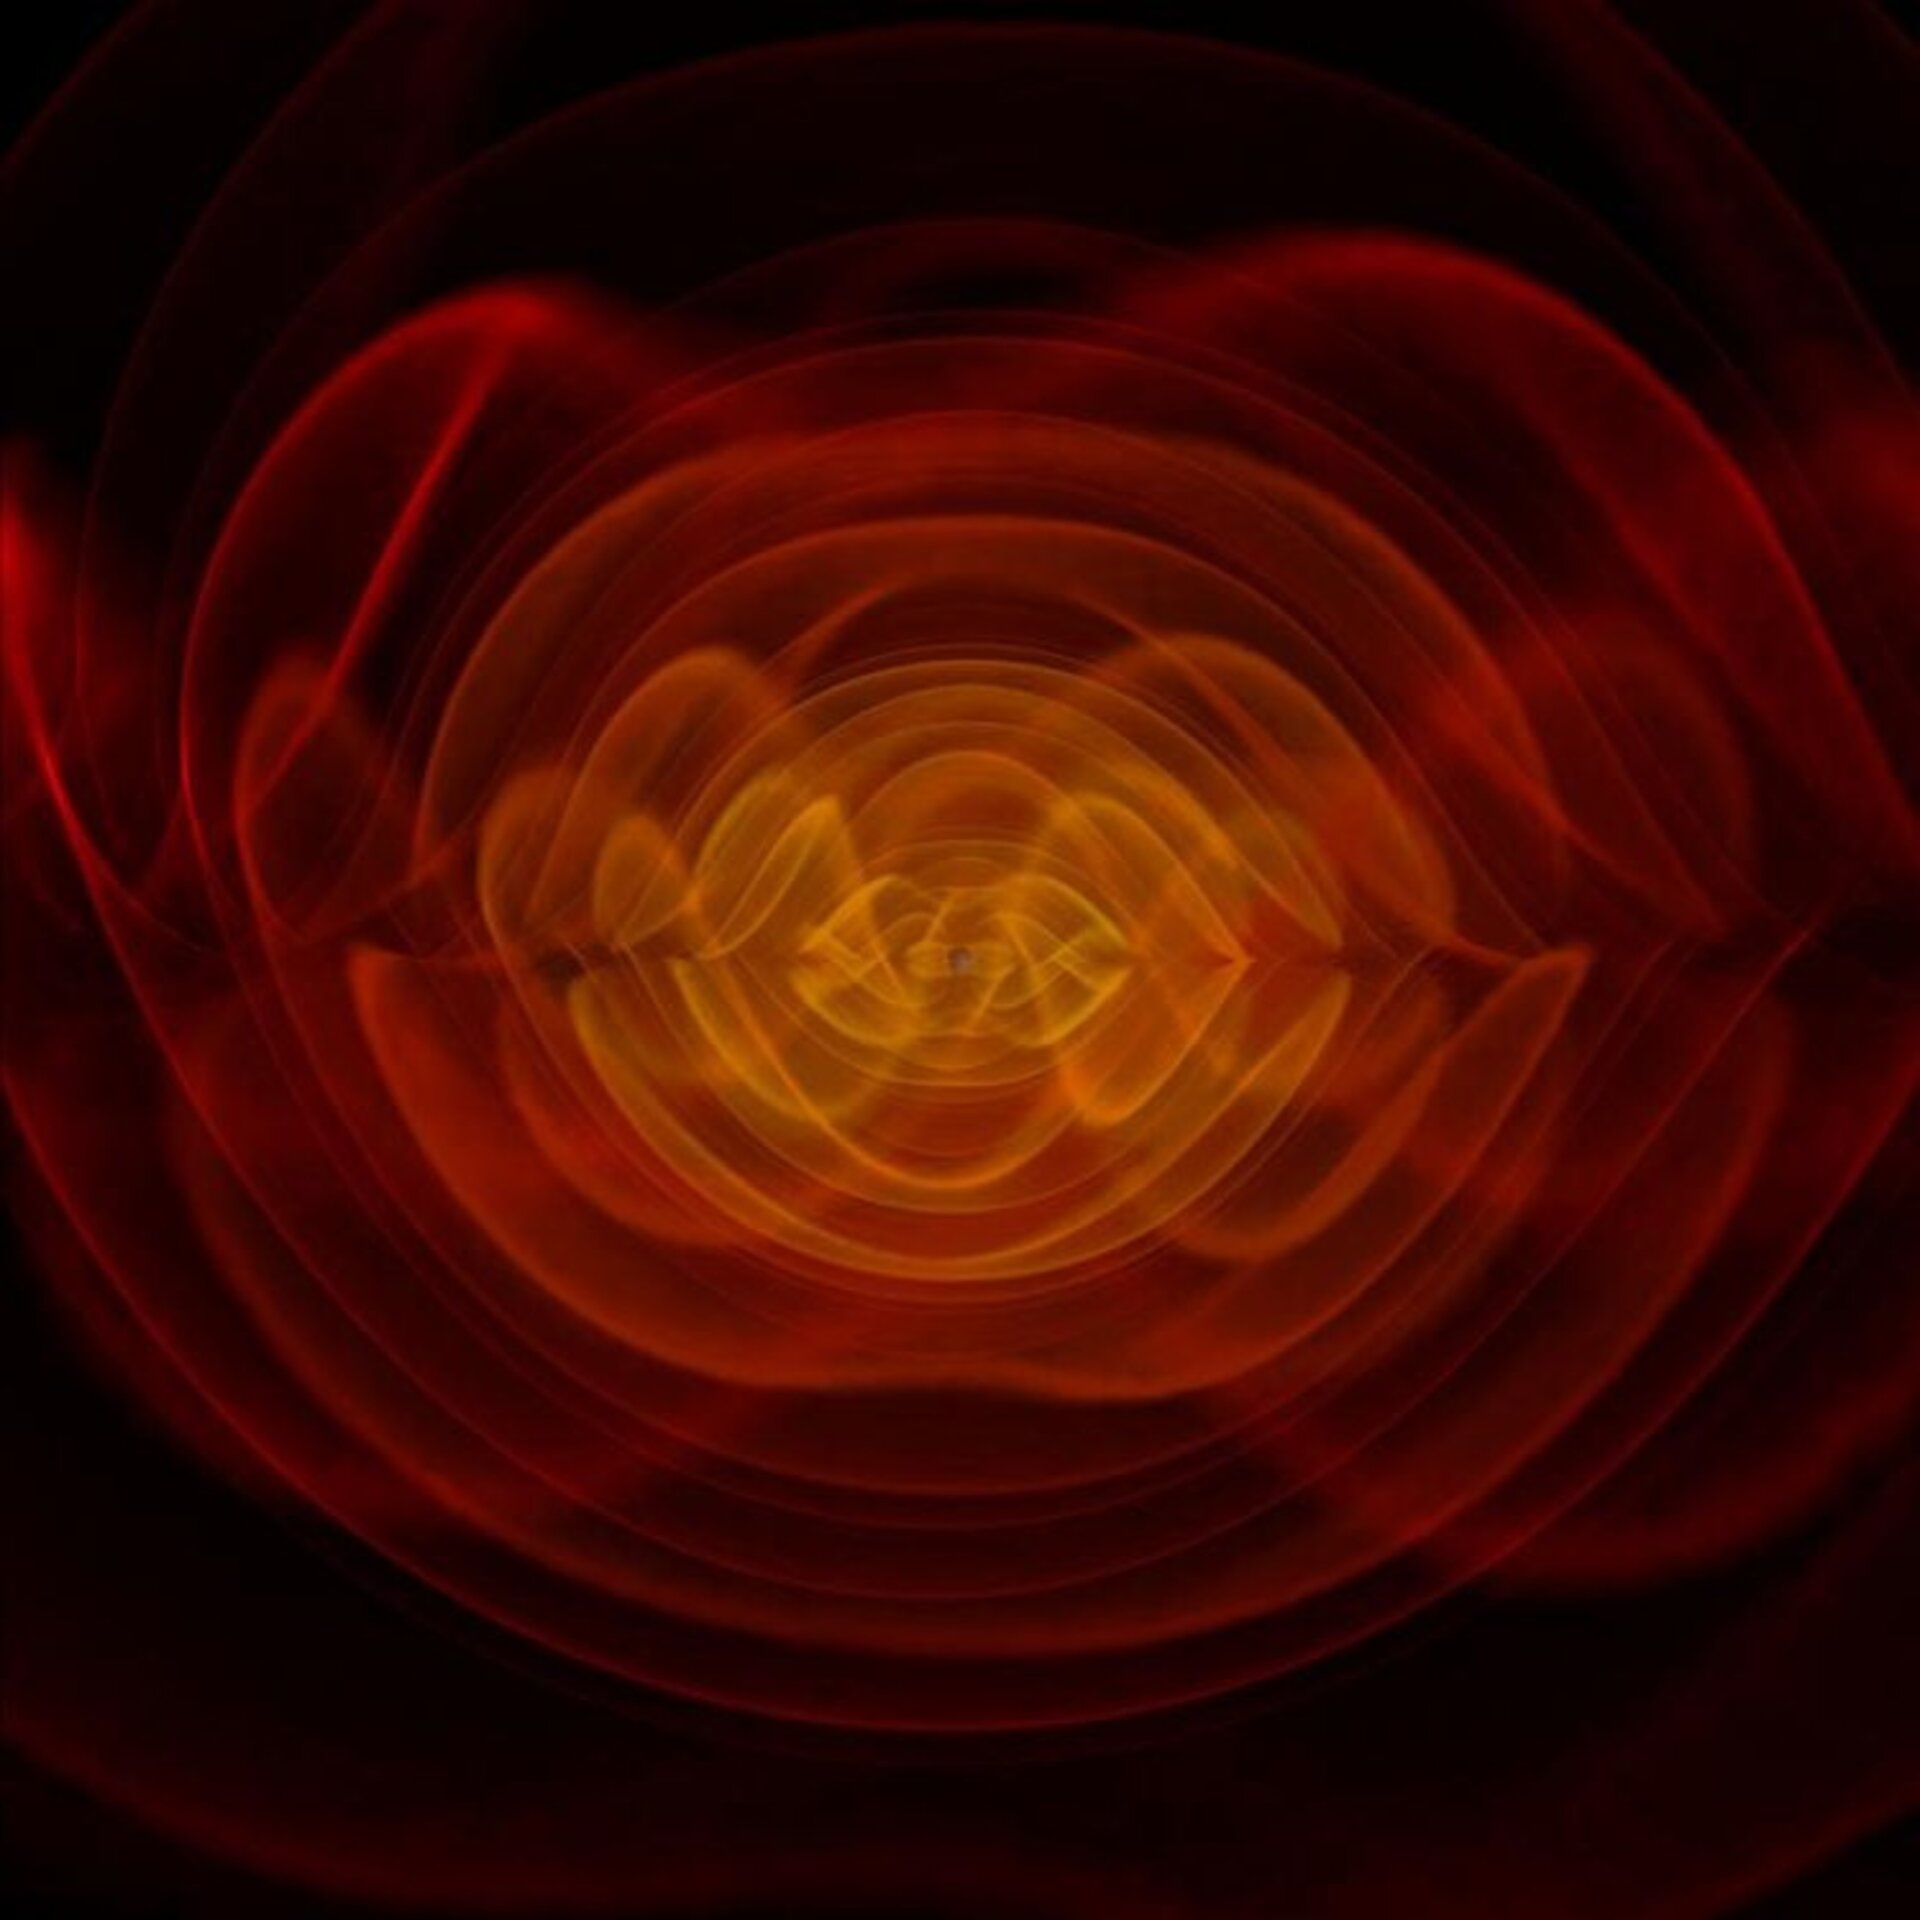 If our eyes could see gravitational waves